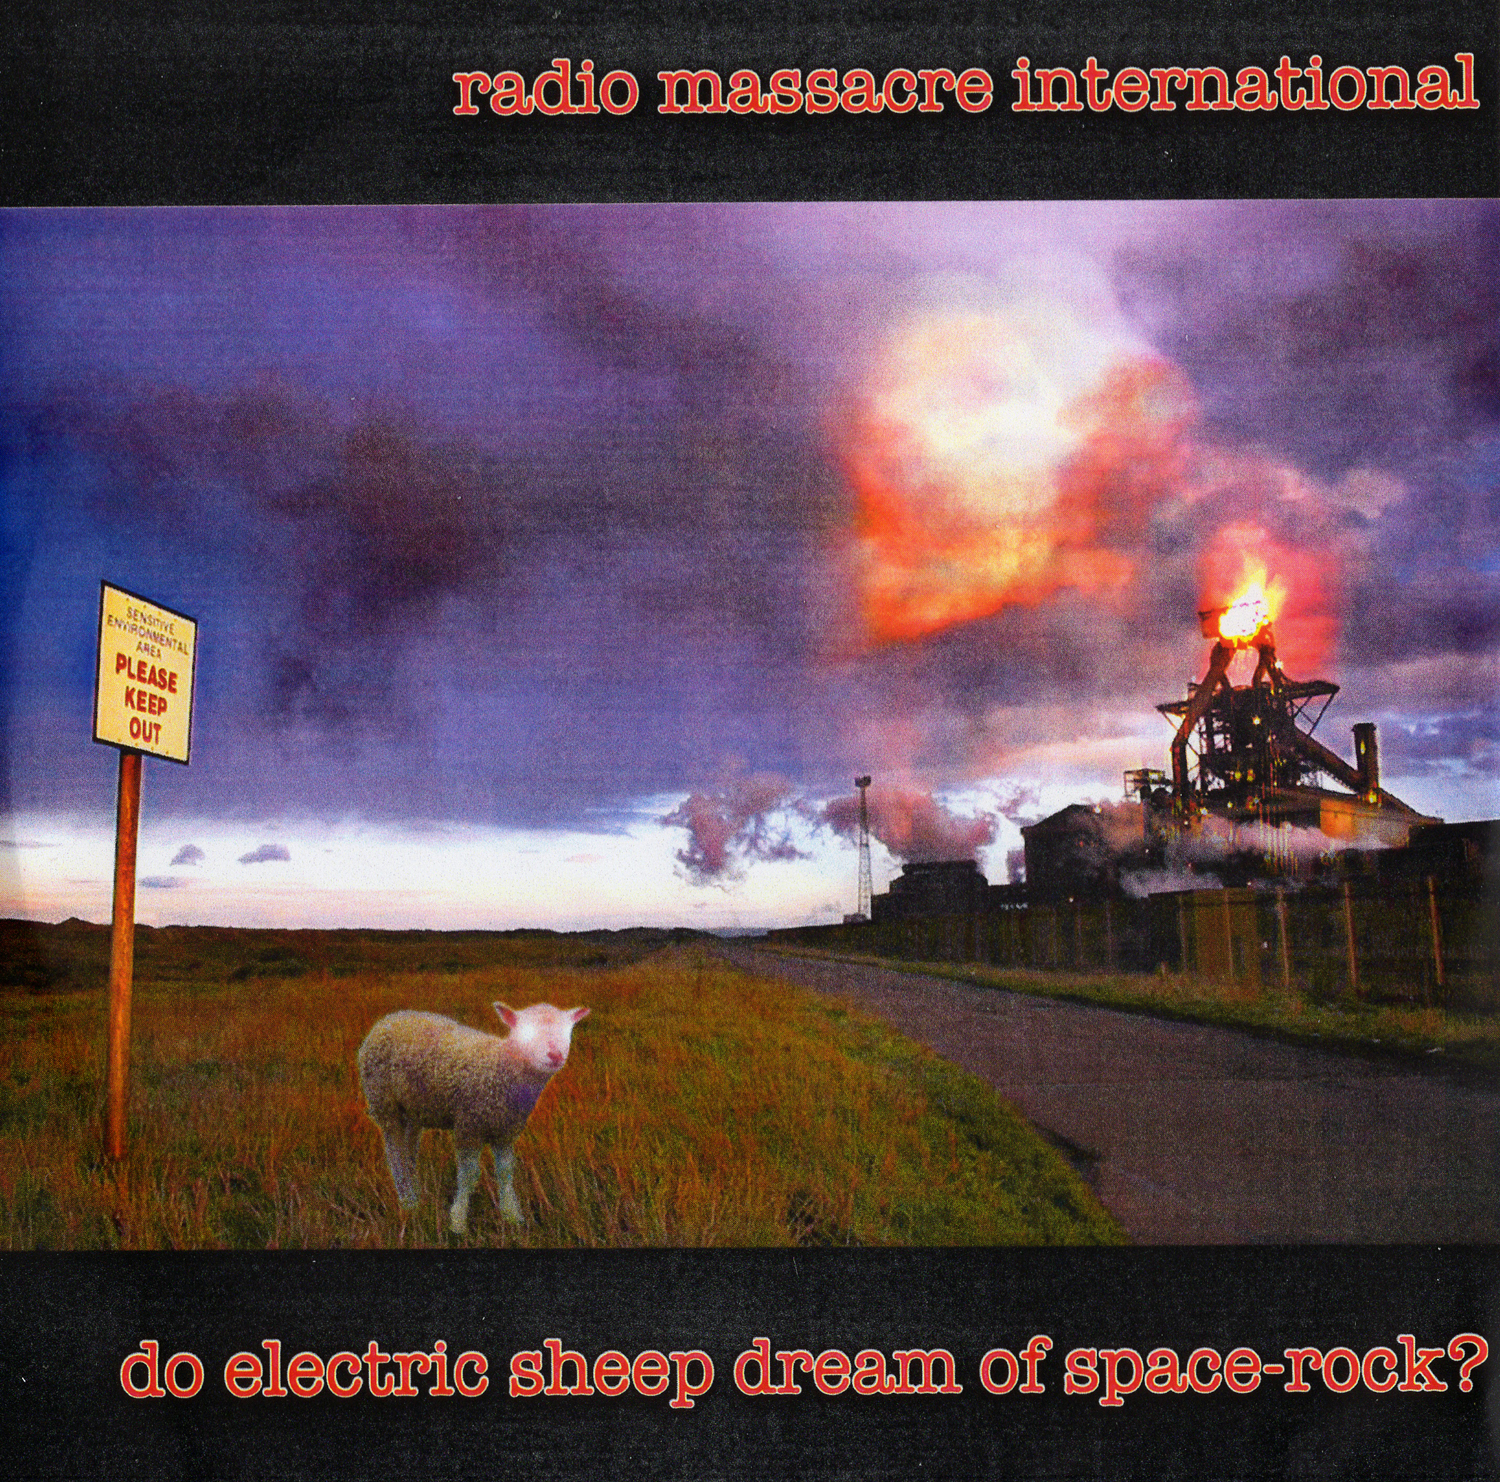 do electric sheep dream of space rock?